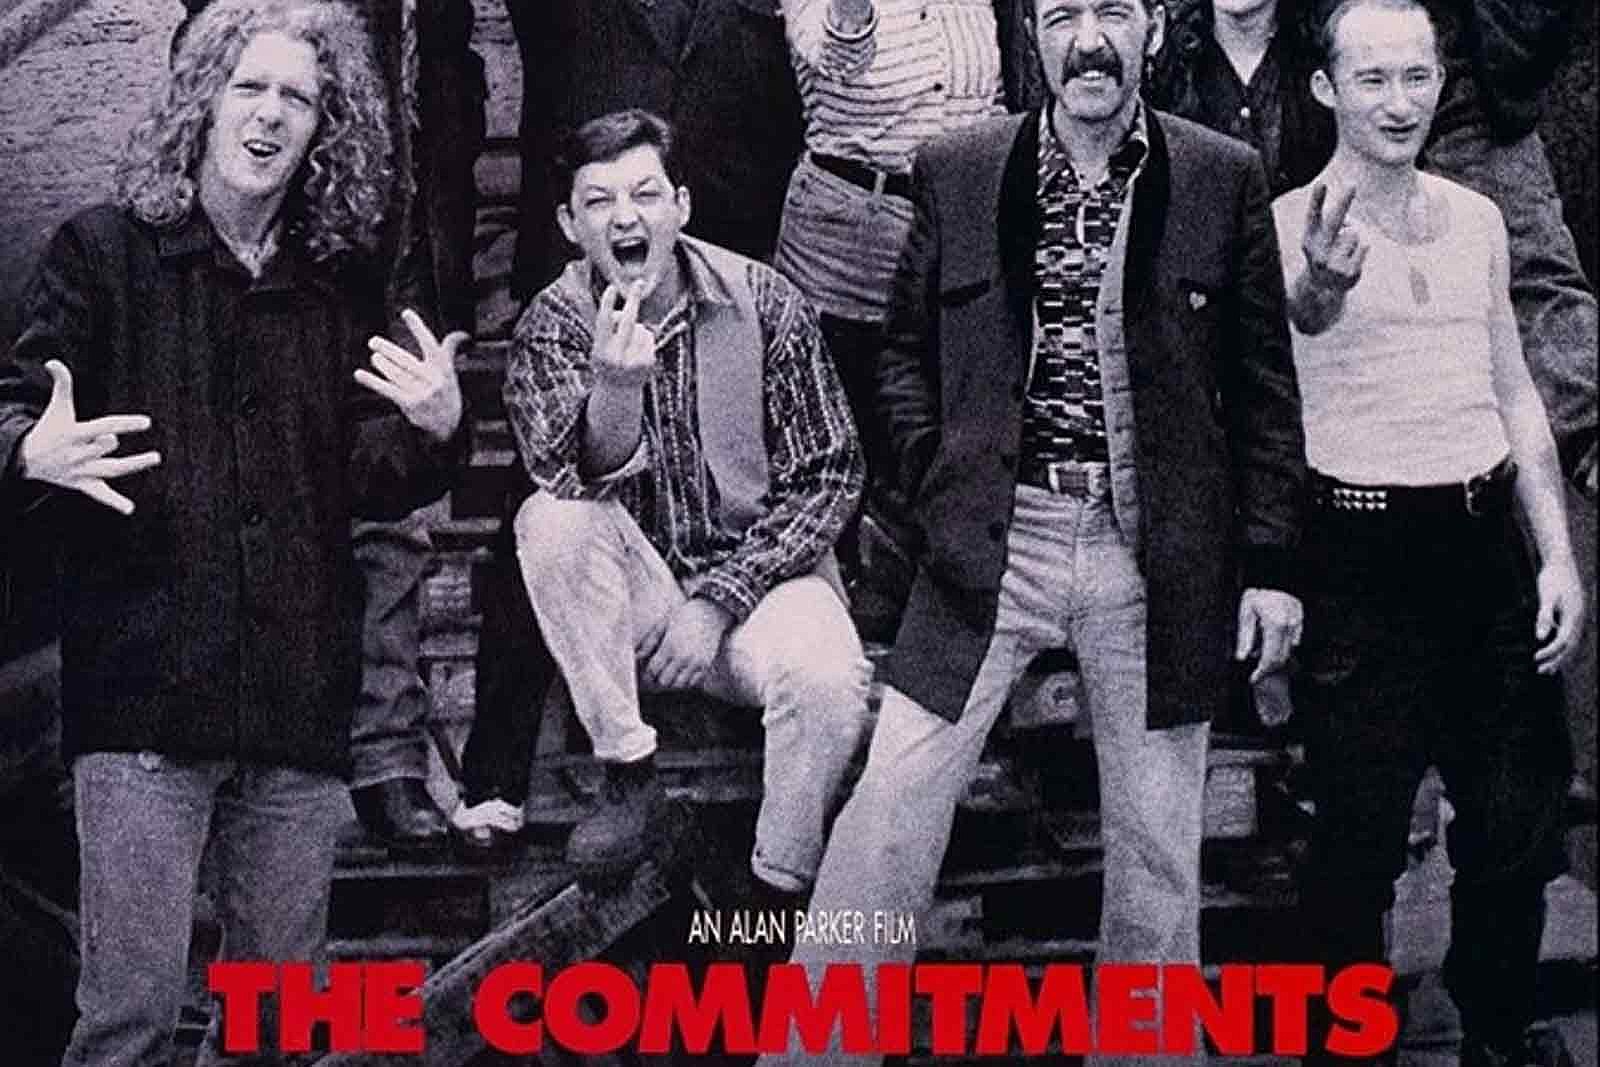 30 Years Ago The Commitments Brings Soul to Dublin